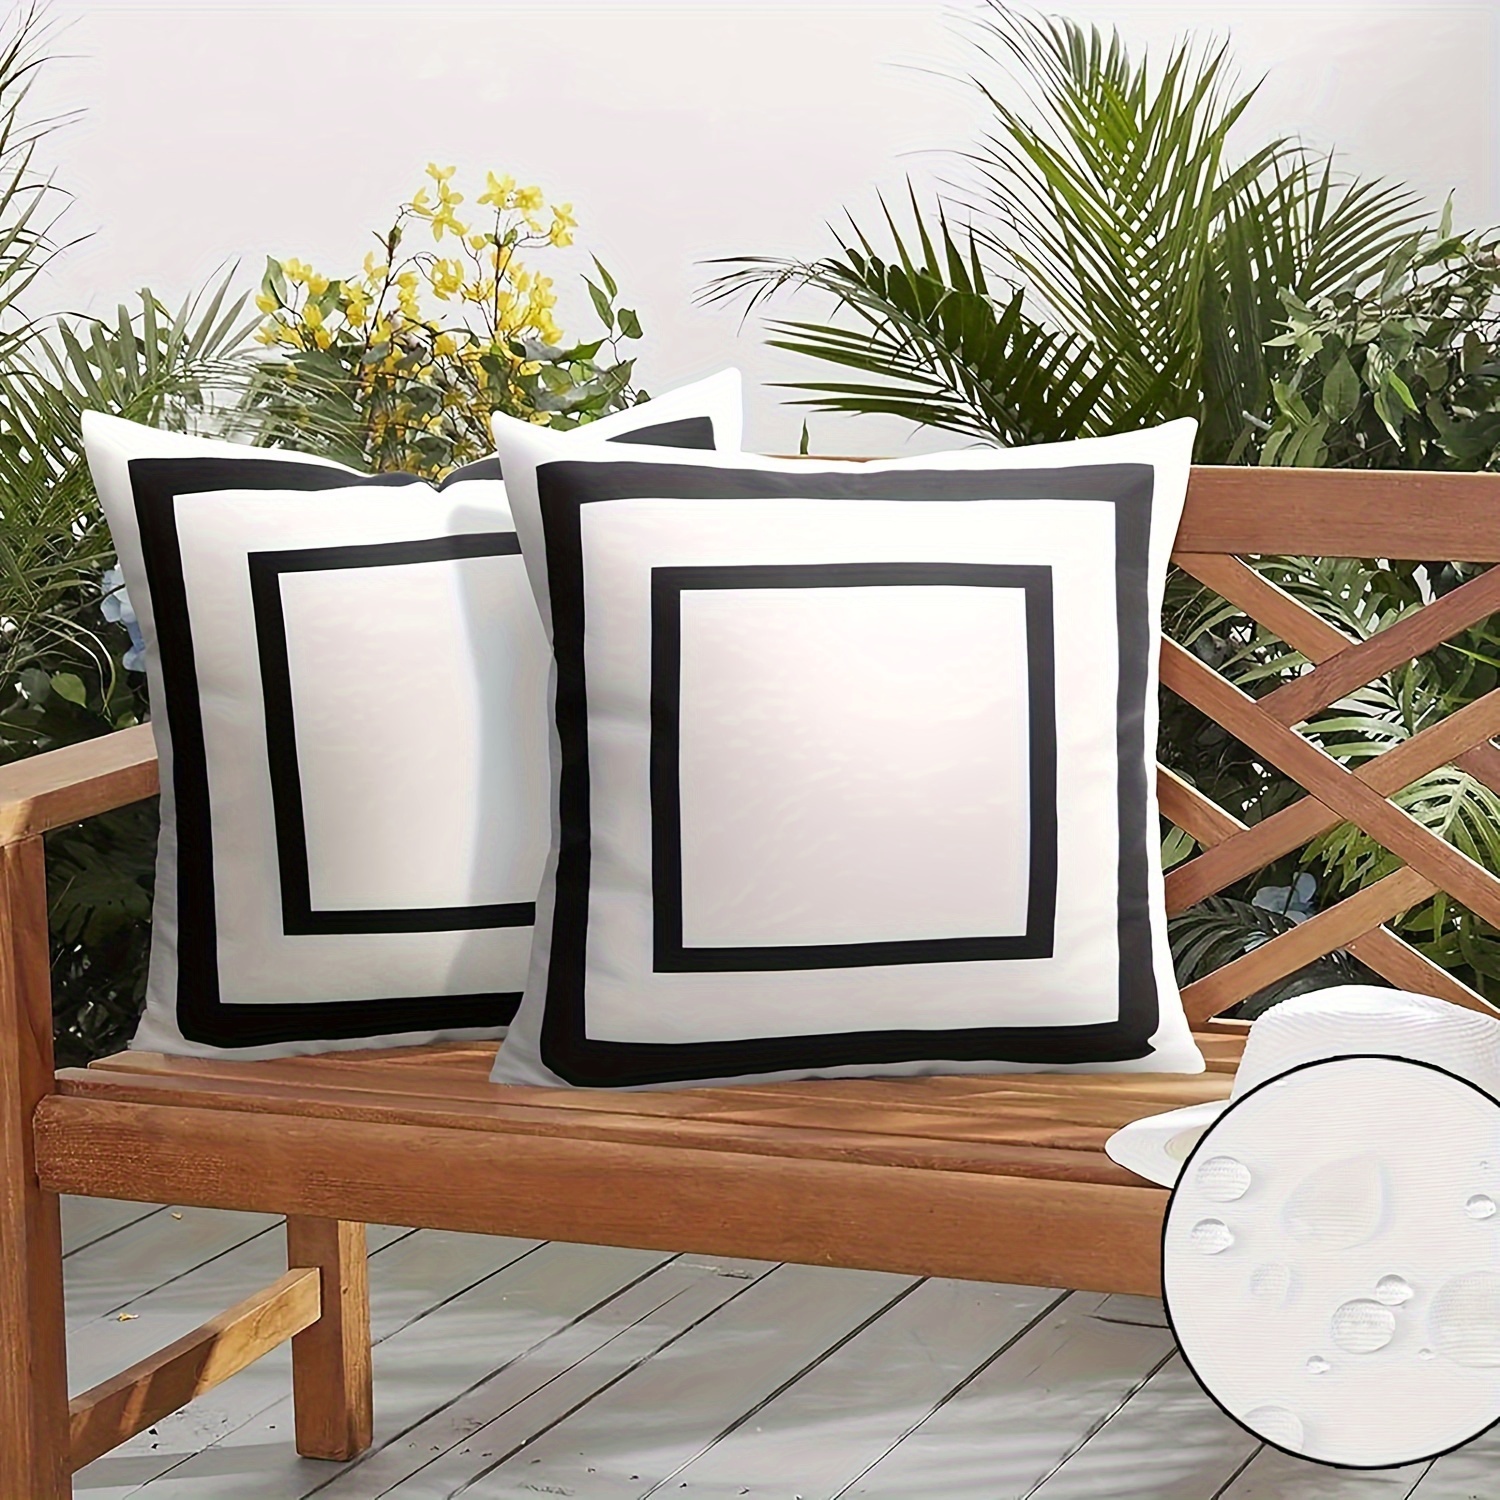 

2-piece Set Of Outdoor Waterproof Pillowcases, Geometric Pillowcases, Black And White Courtyard Garden Pillowcases, Oxford Cloth (excluding Inner Core)